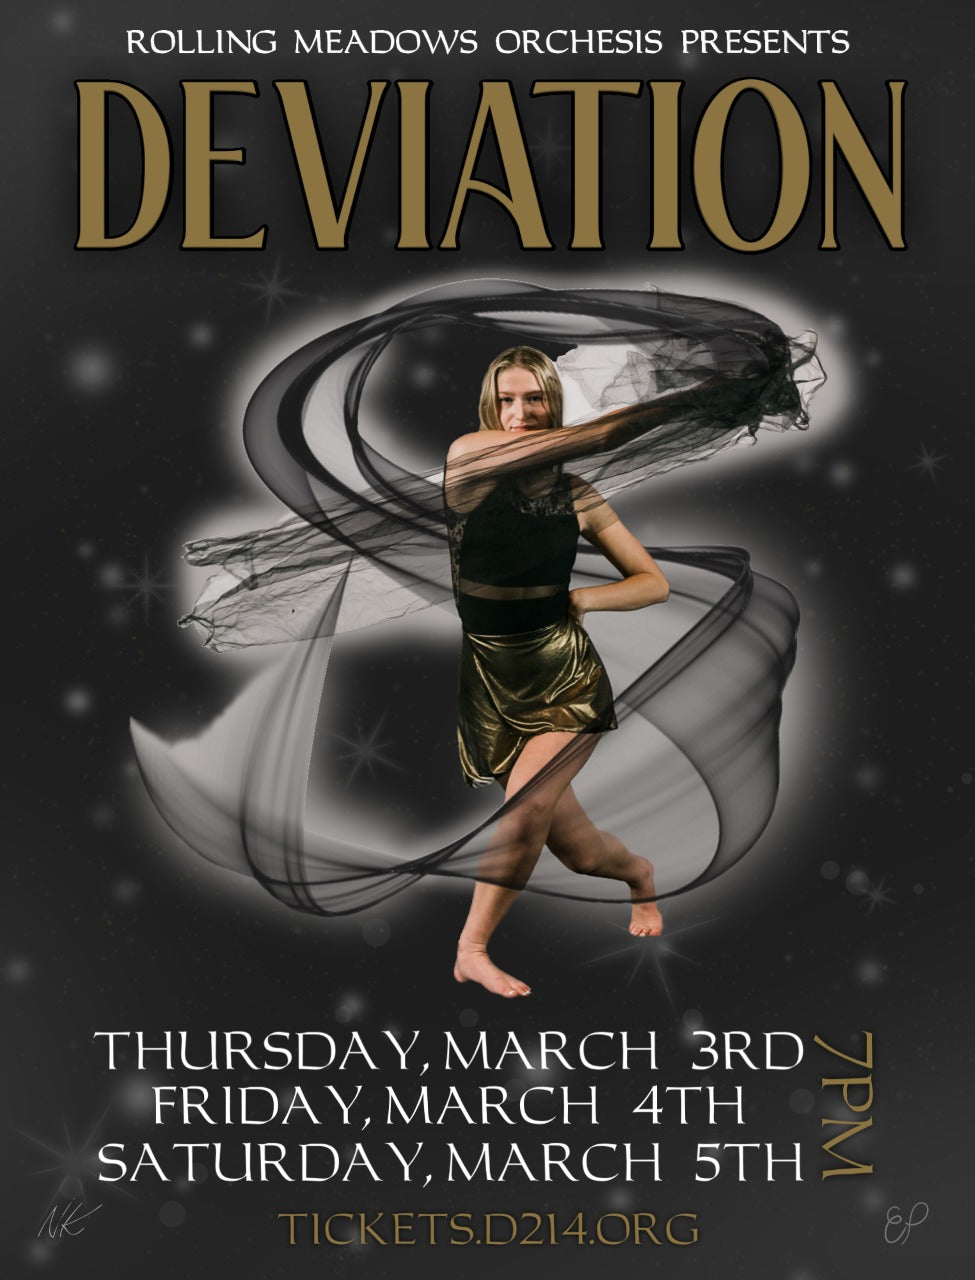 Rolling Meadows Orchesis: Deviation